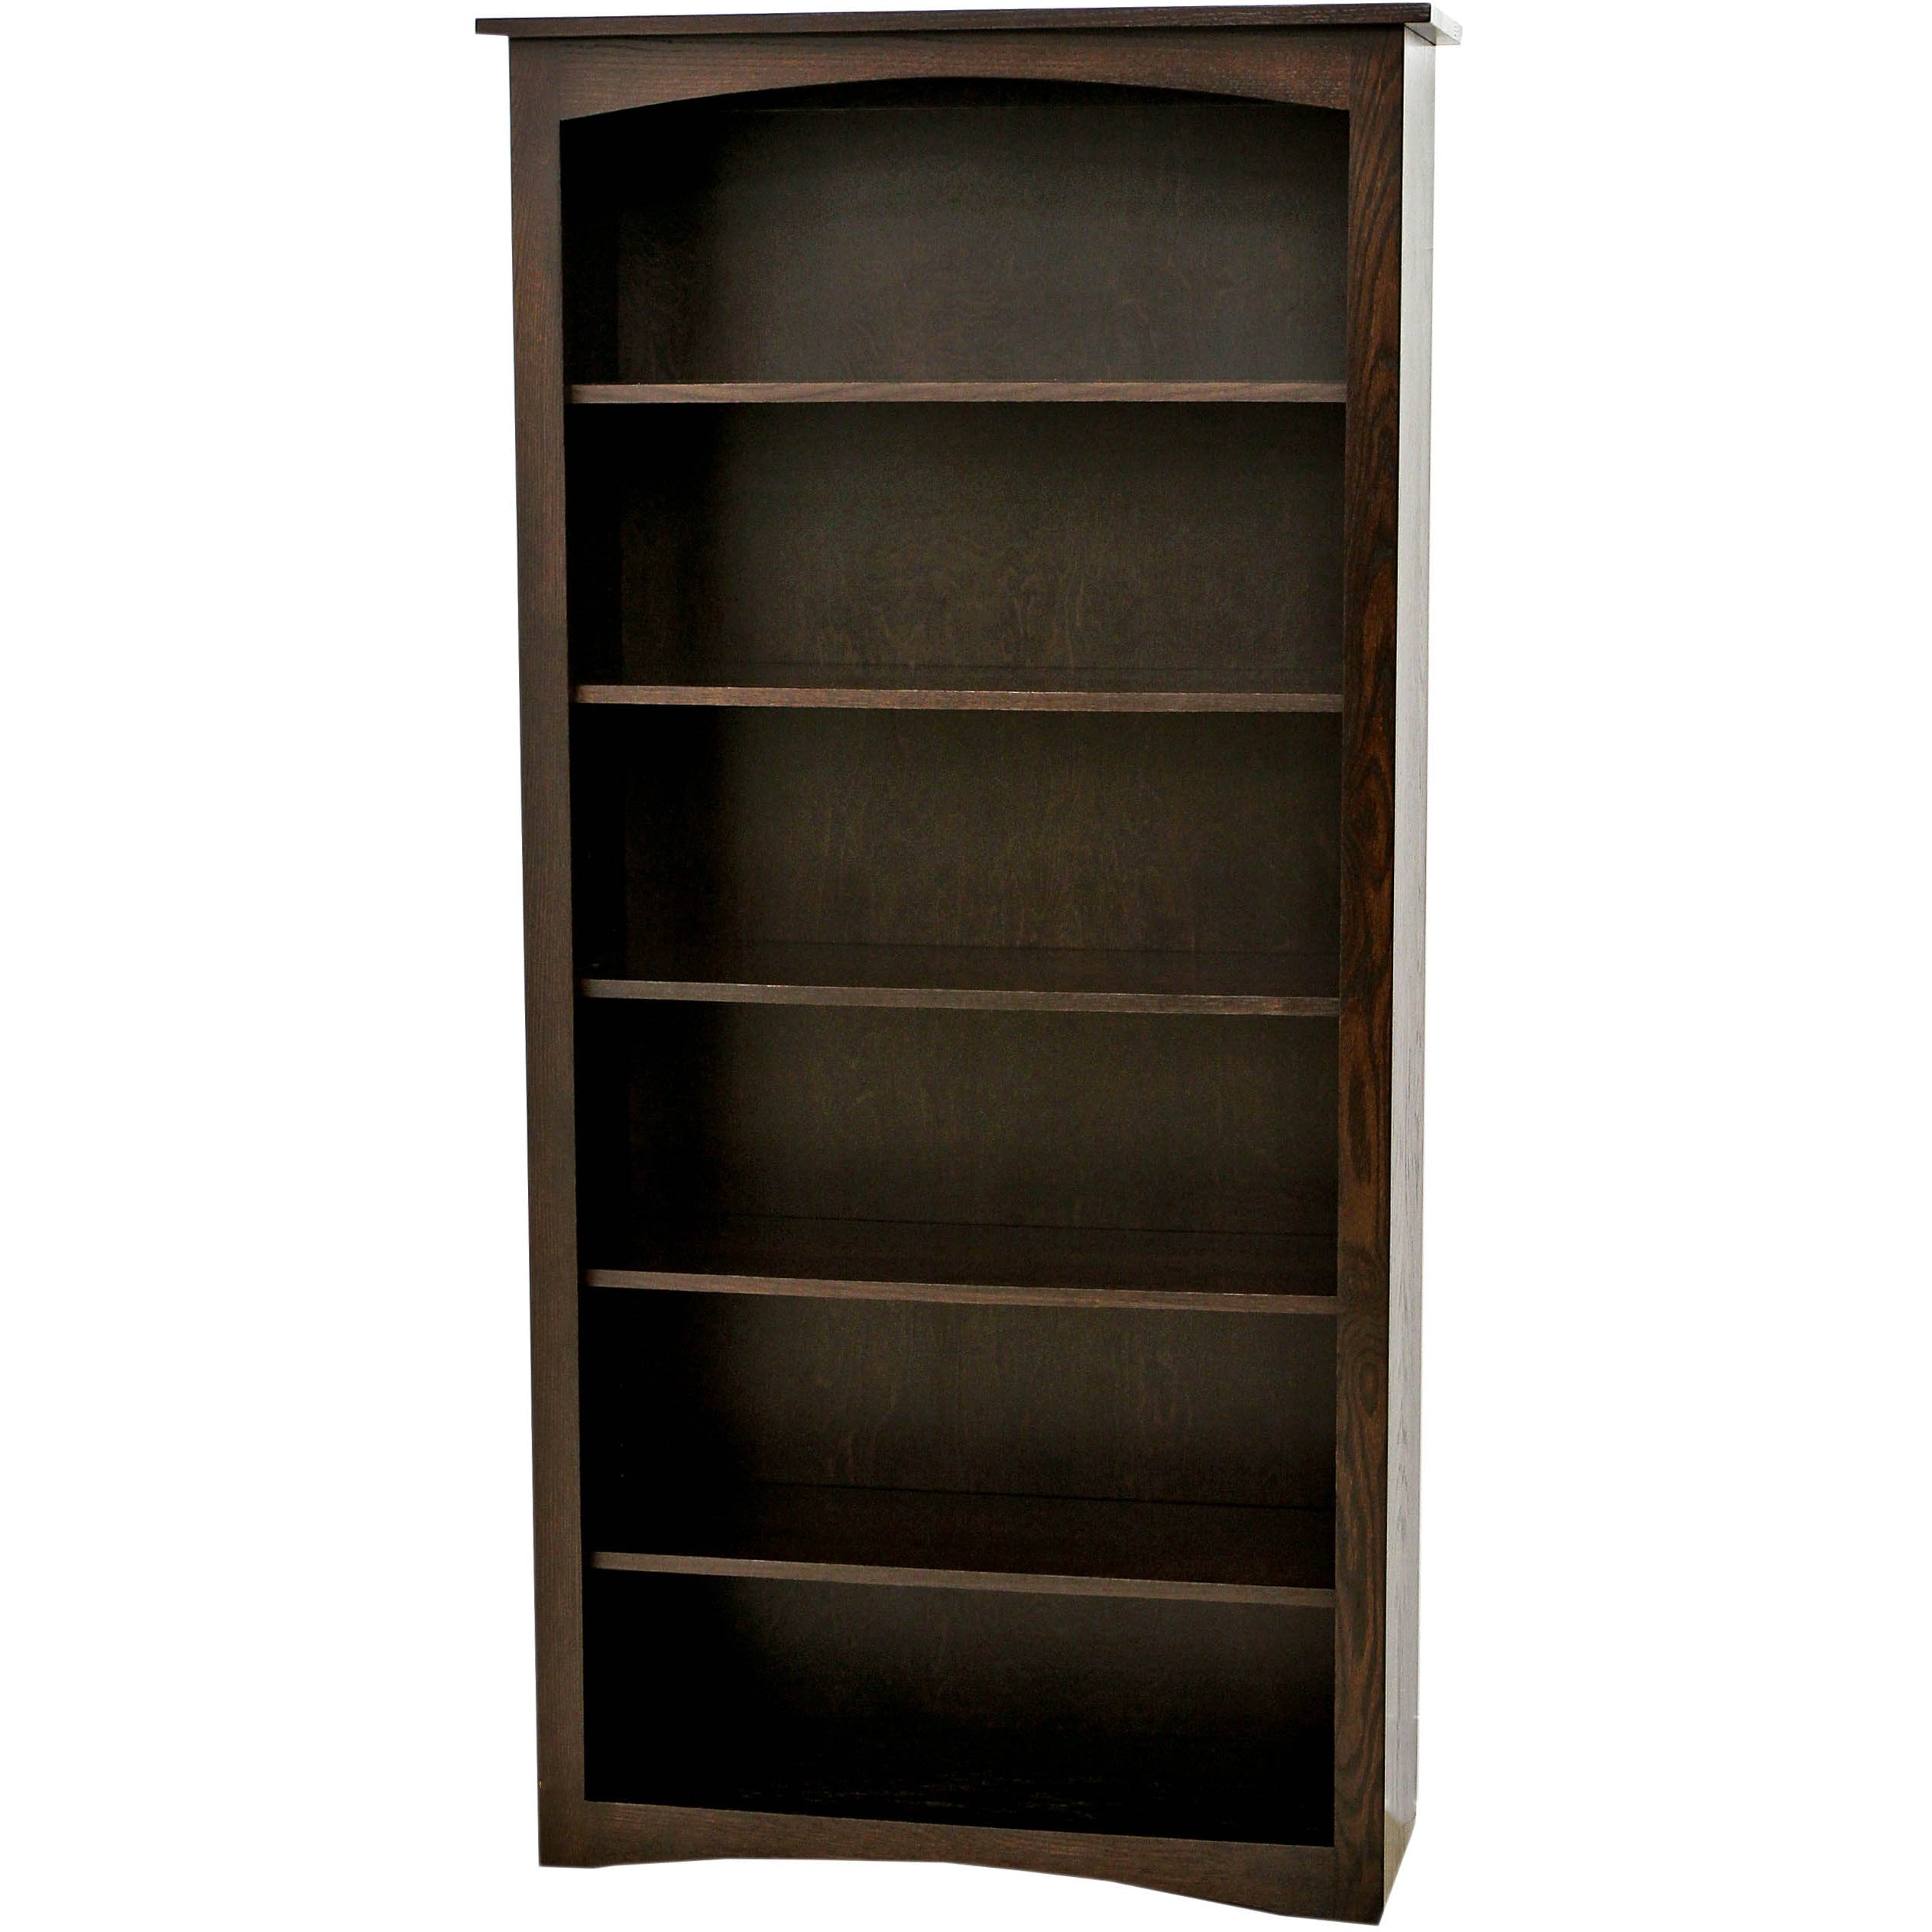 Shaker Solid Wood Bookcase, 72